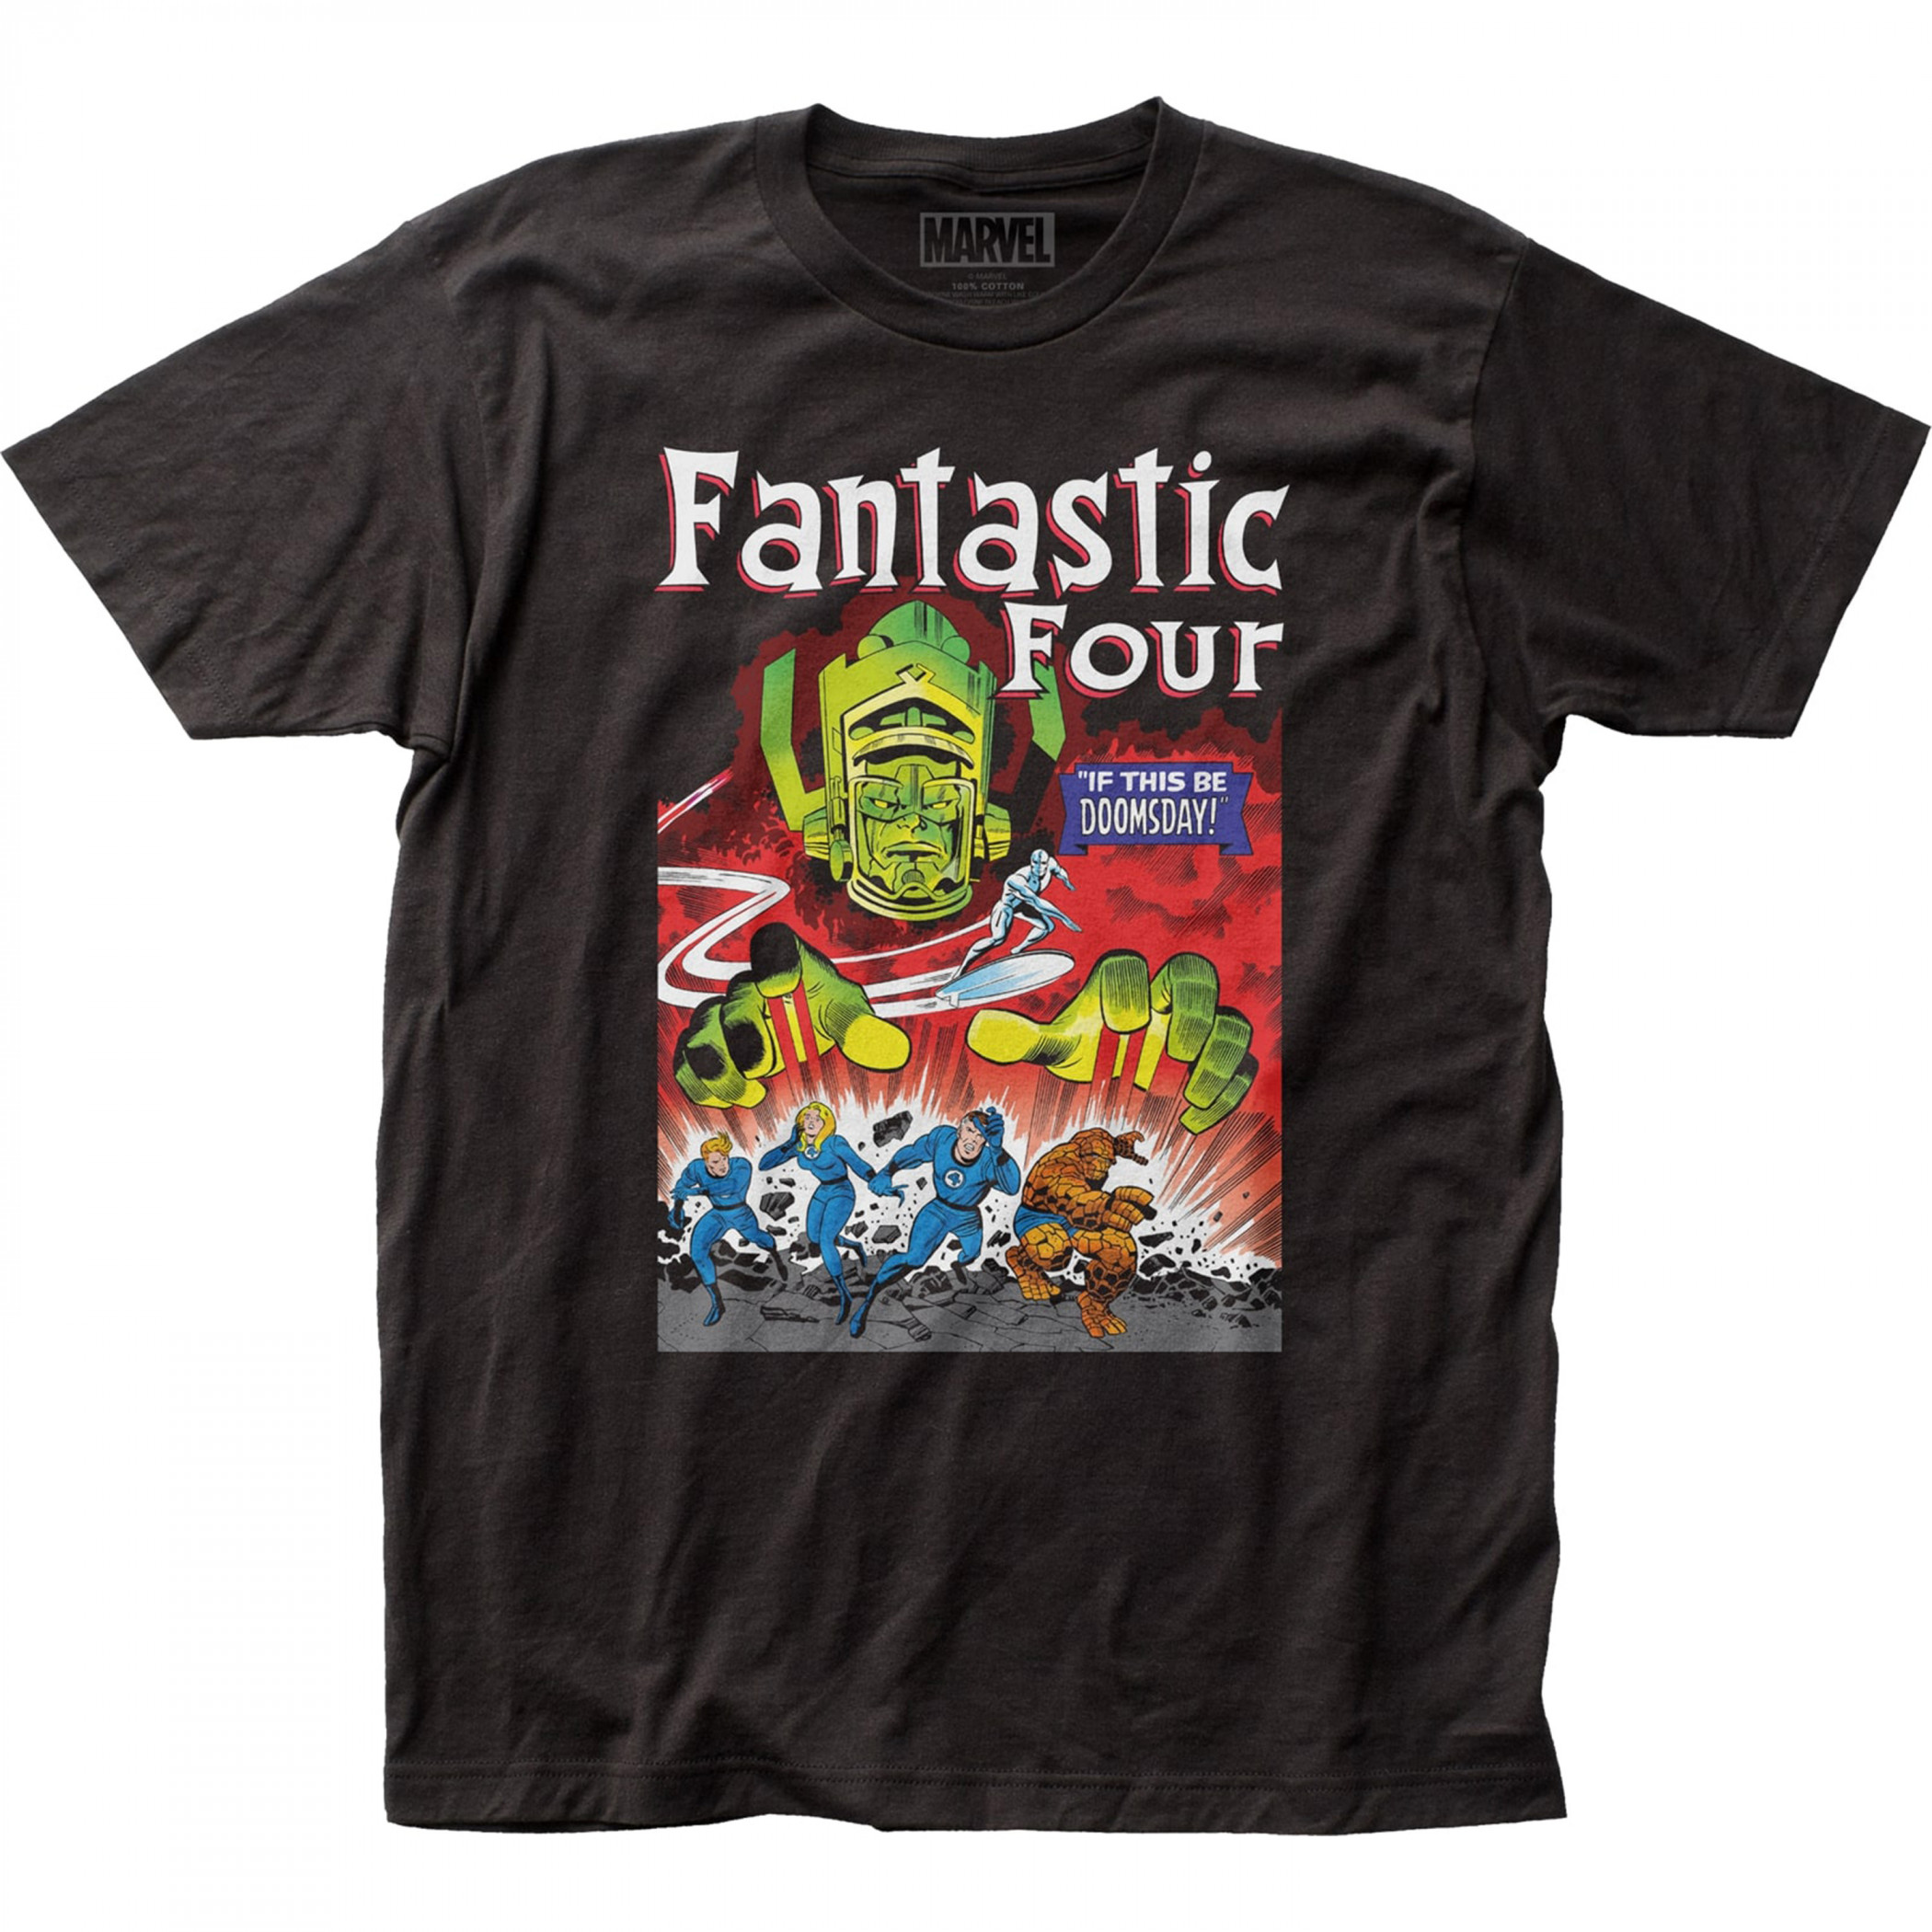 Fantastic Four If This Be Doomsday Comic Art T-Shirt